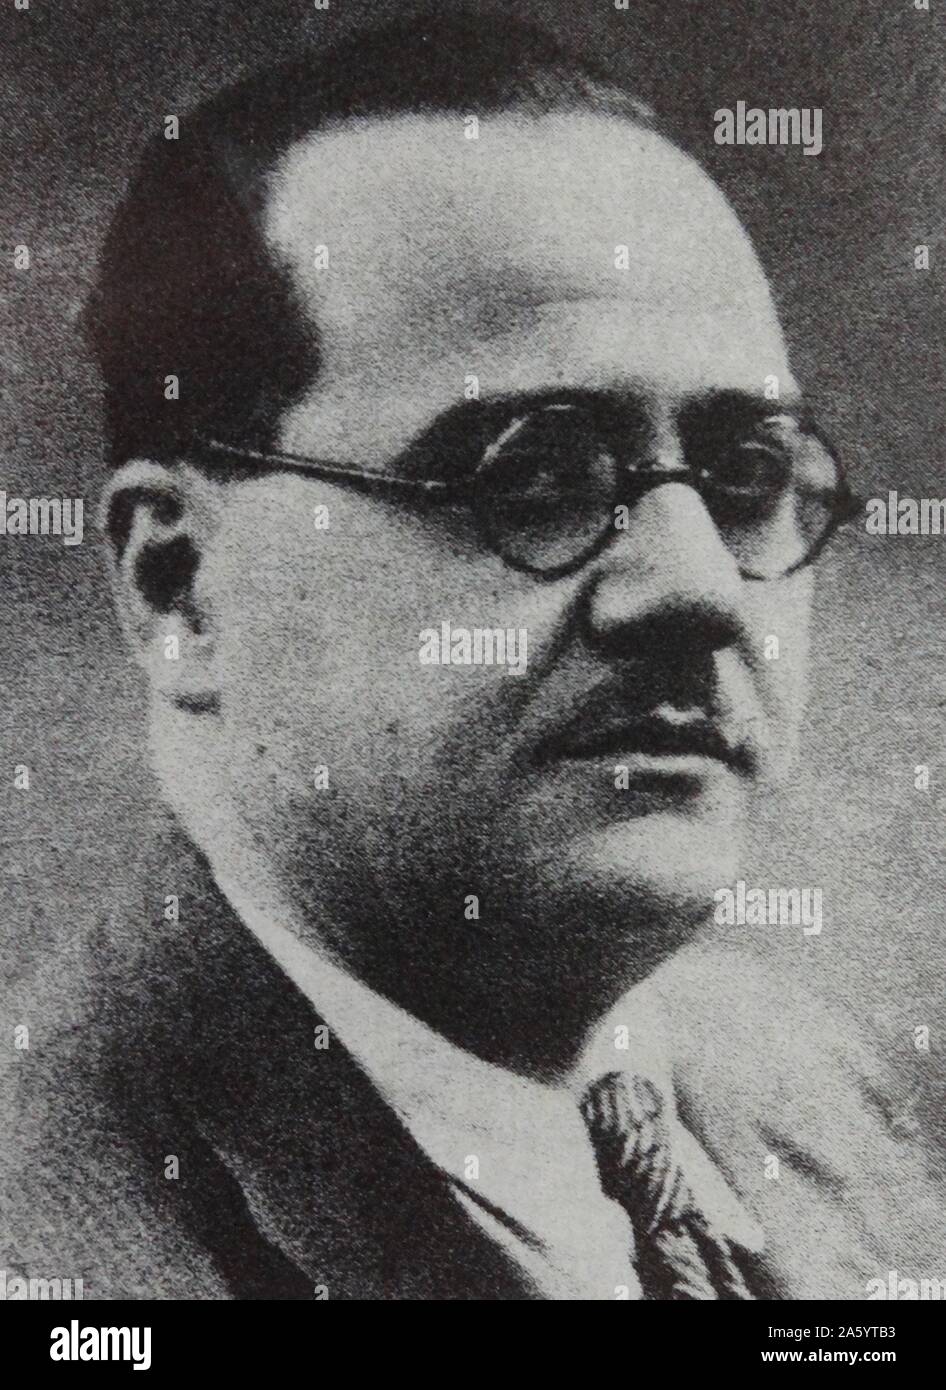 Juan Negrín y López (3 February 1892 – 12 November 1956) was a Spanish politician and physician. He was a leader of the Spanish Socialist Workers' Party (PSOE) and served as finance minister. He was the last Loyalist premier of Spain (1937–39), and presided over the defeat of the Republican forces by the Nationalists under General Francisco Franco during the Spanish Civil War Stock Photo